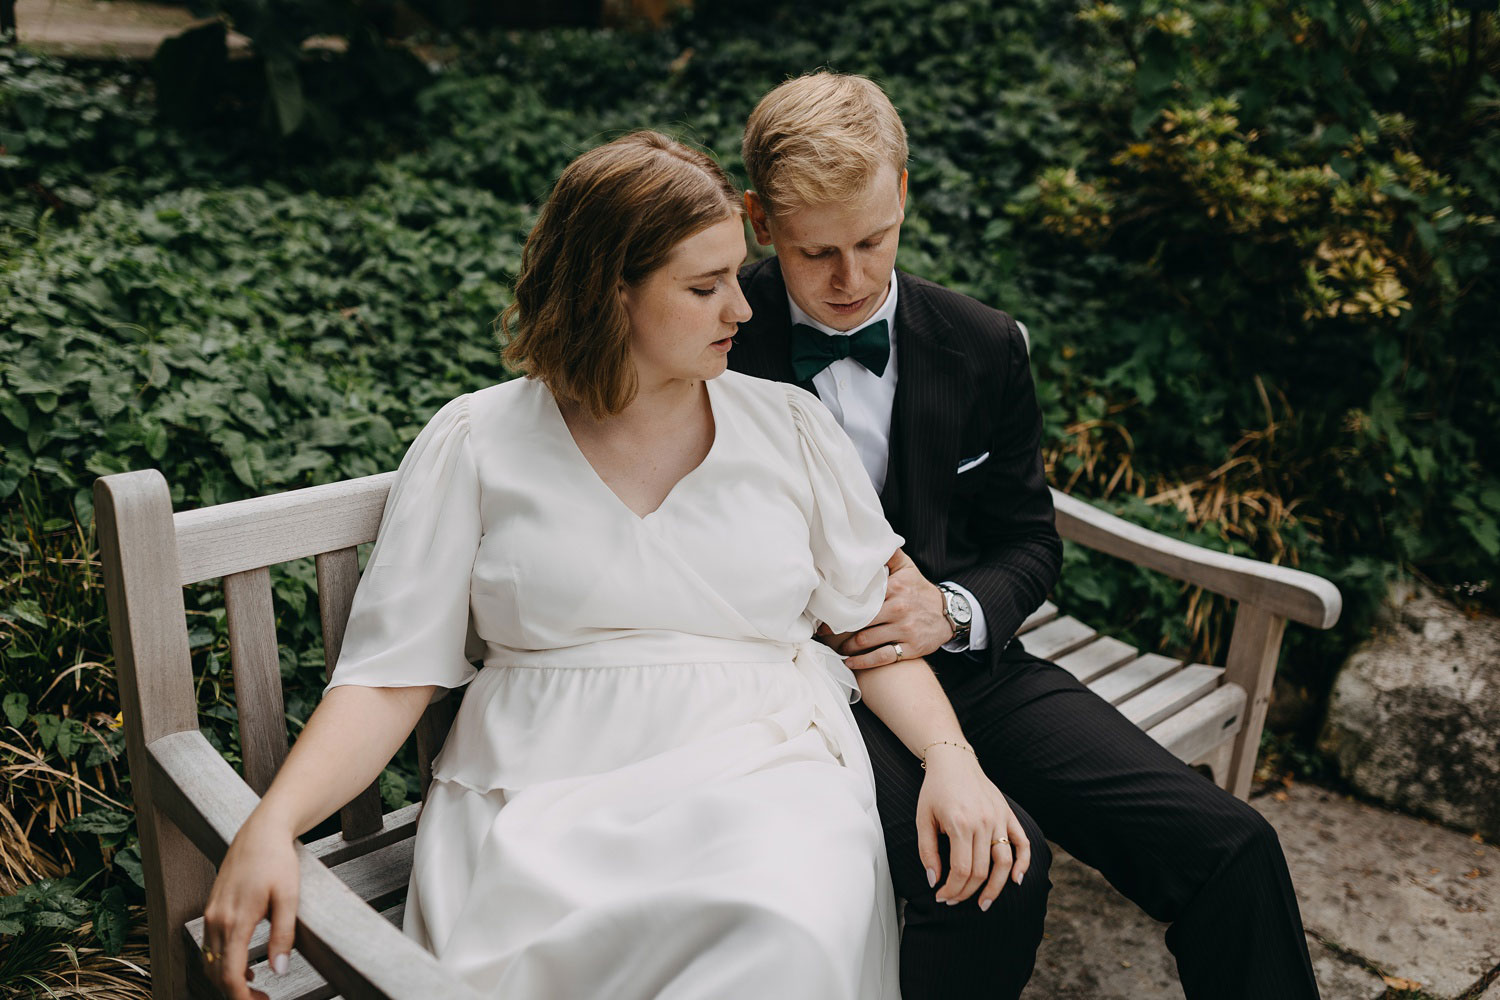 Happily married couple capturing a beautiful memory amidst the greenery of Frederiksberg Have